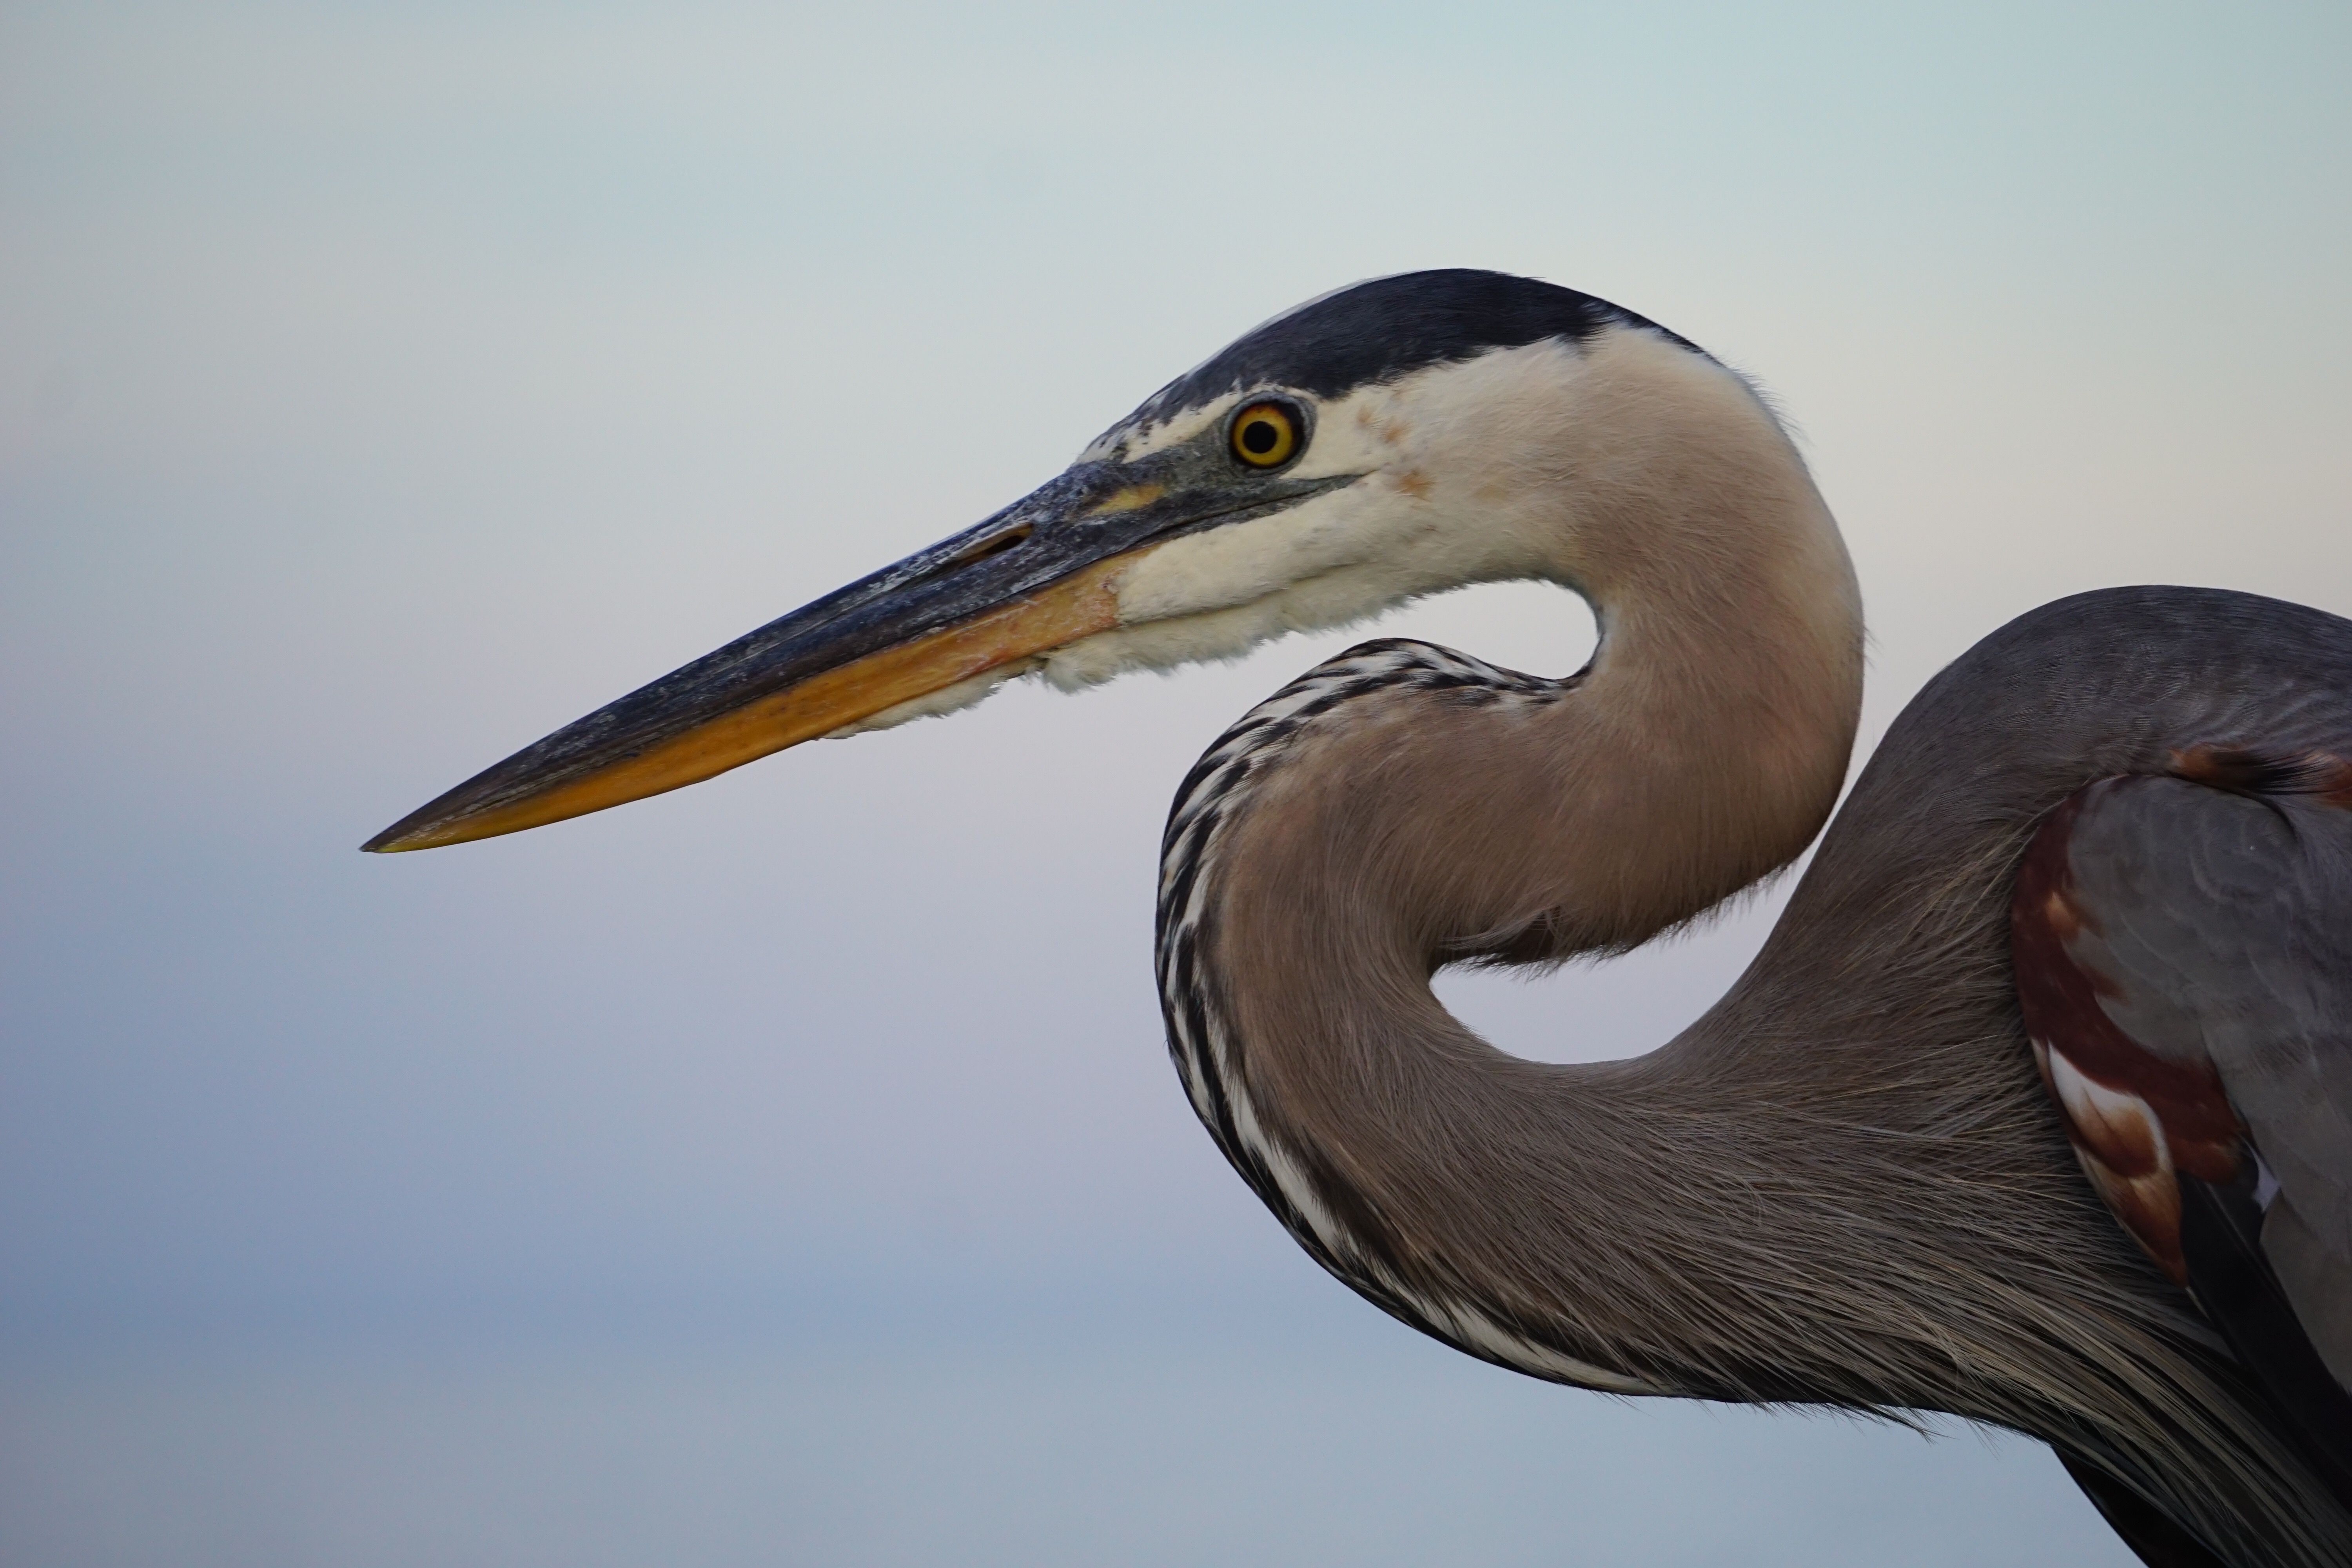 Close up view of neck/head Great Blue Heron